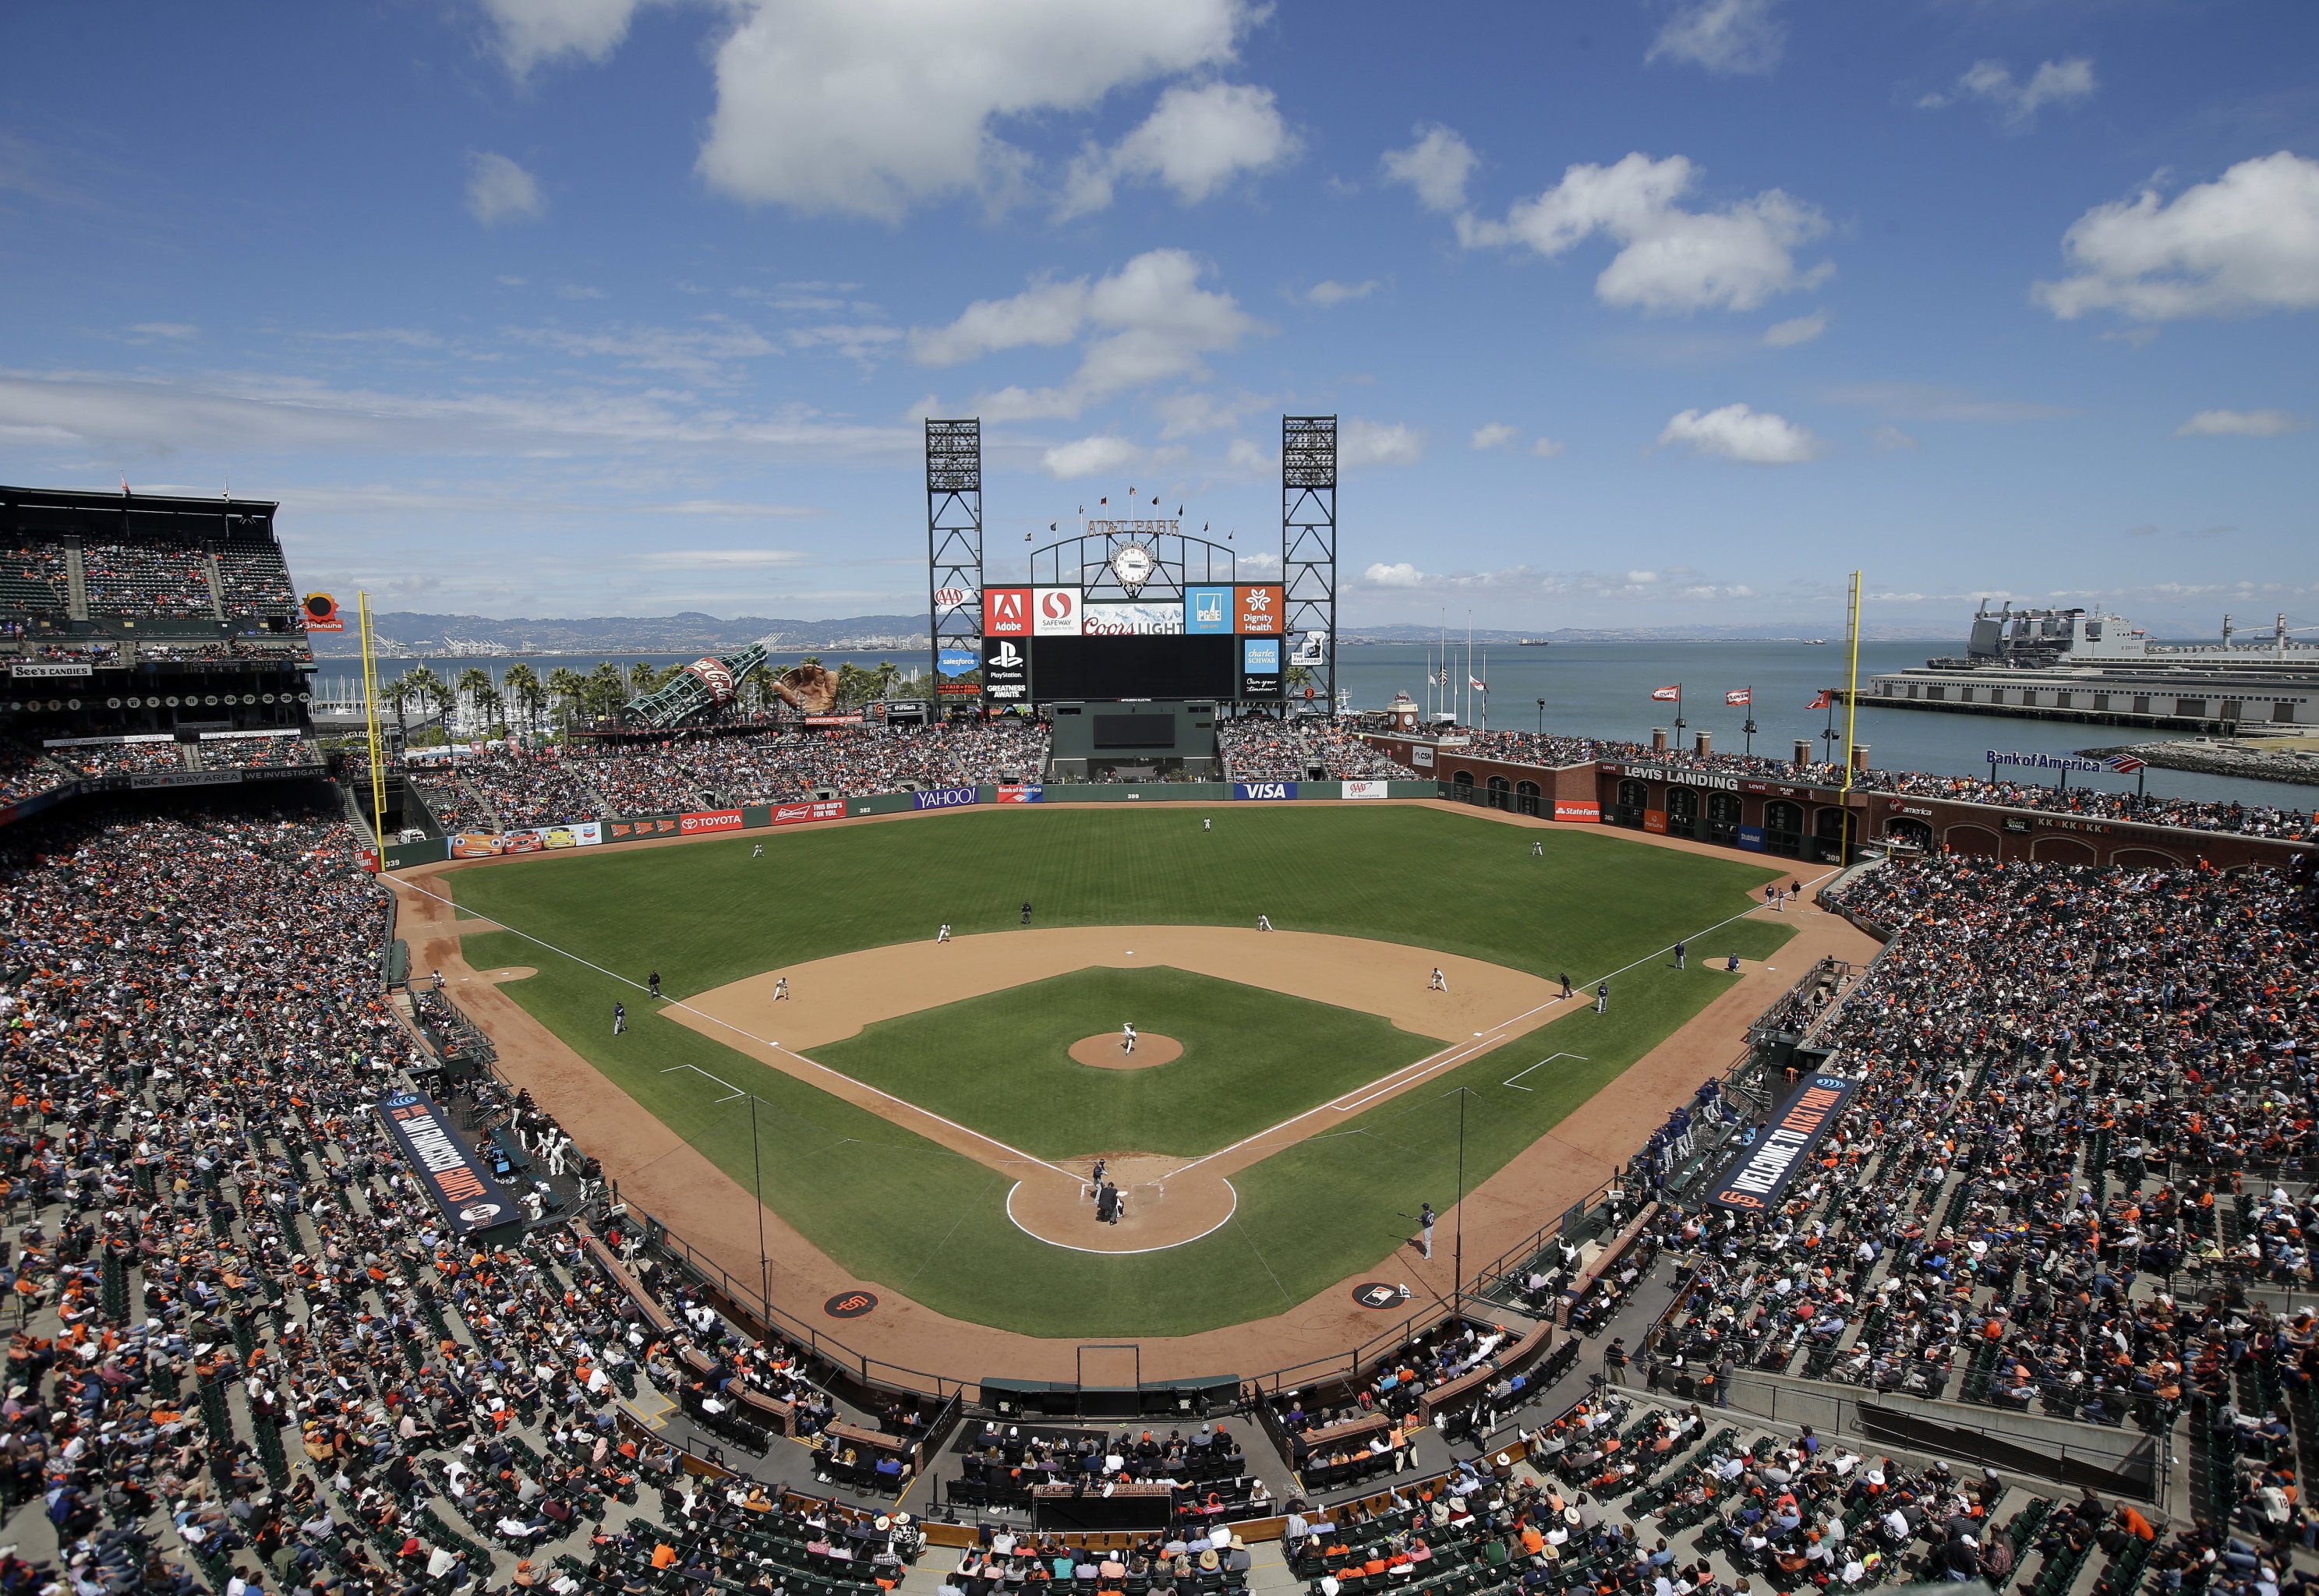 MLB Ballparks Without Naming Rights Deals